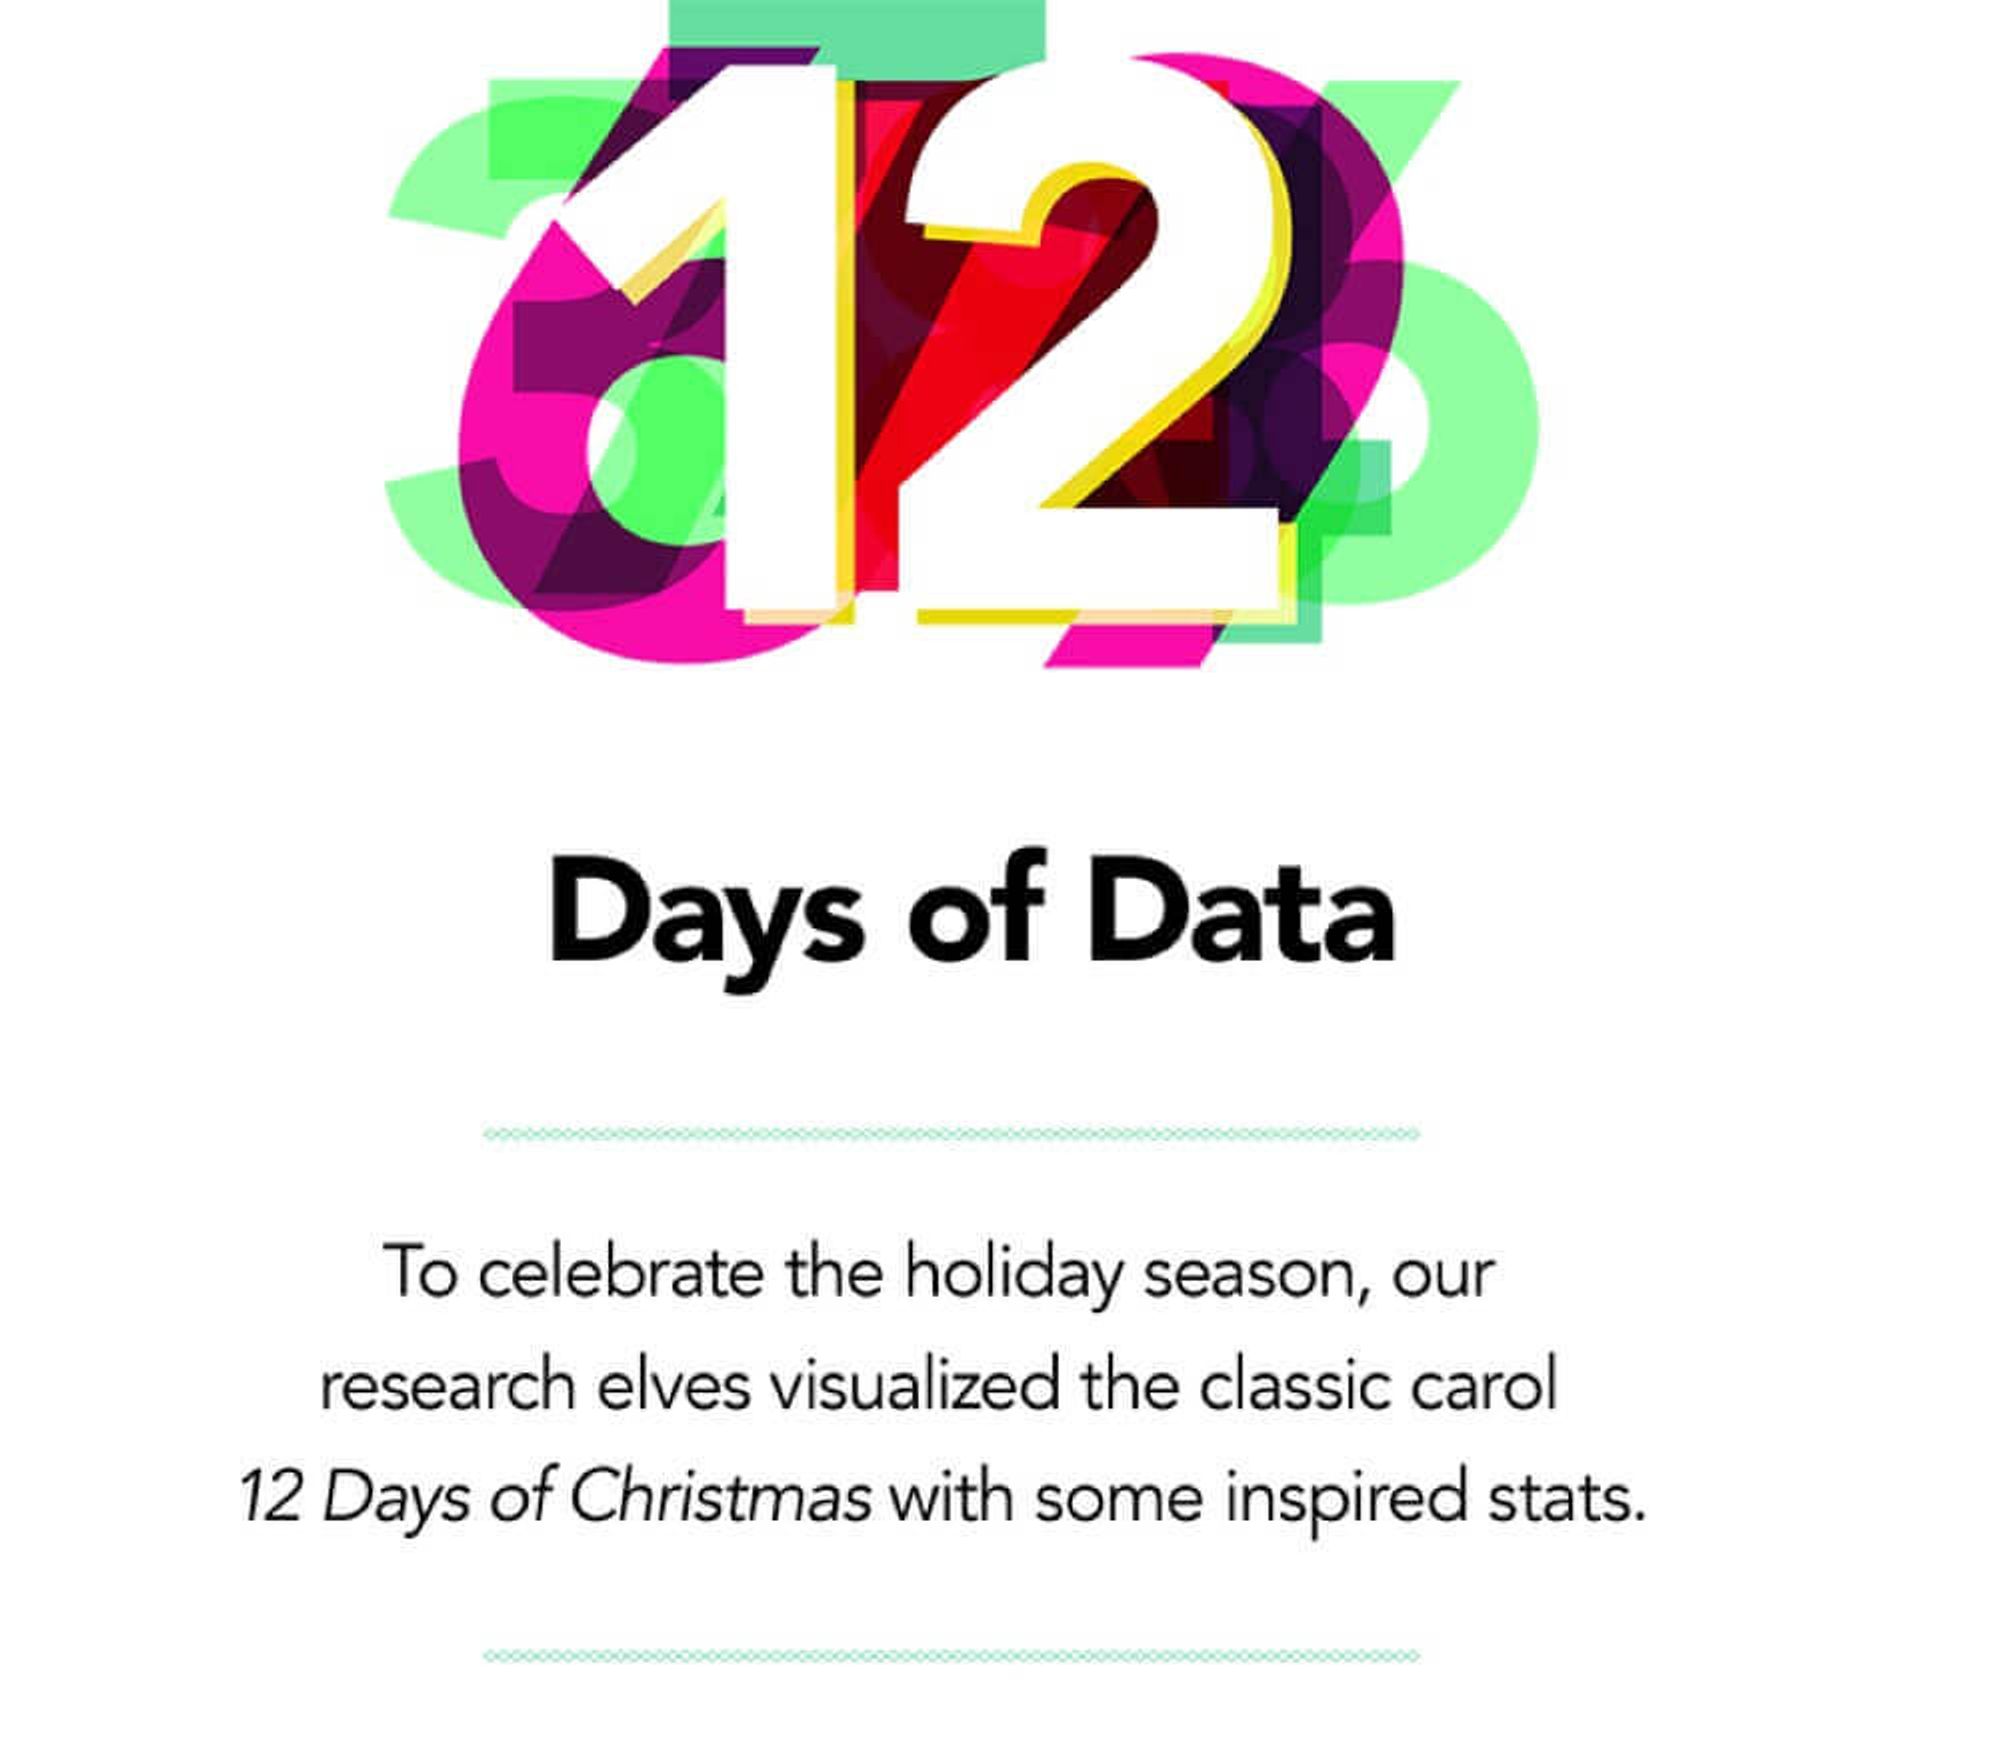 The 12 Days of Christmas (And data, too)